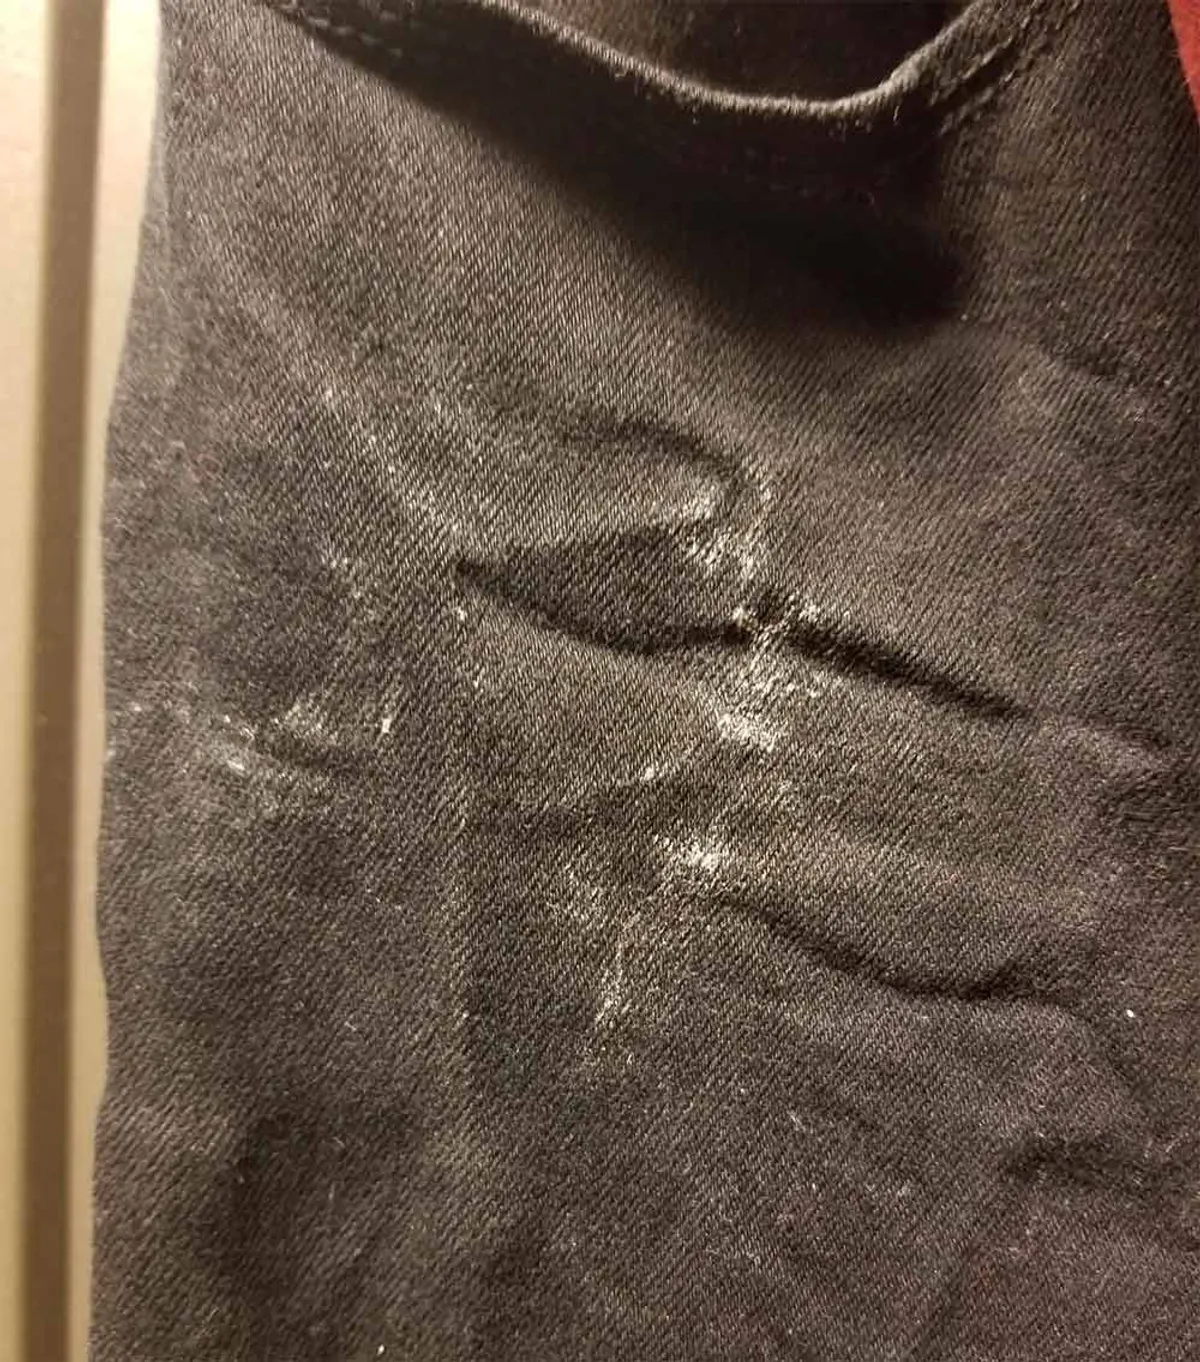 Streaks of white calcium on clothes washed with hard water